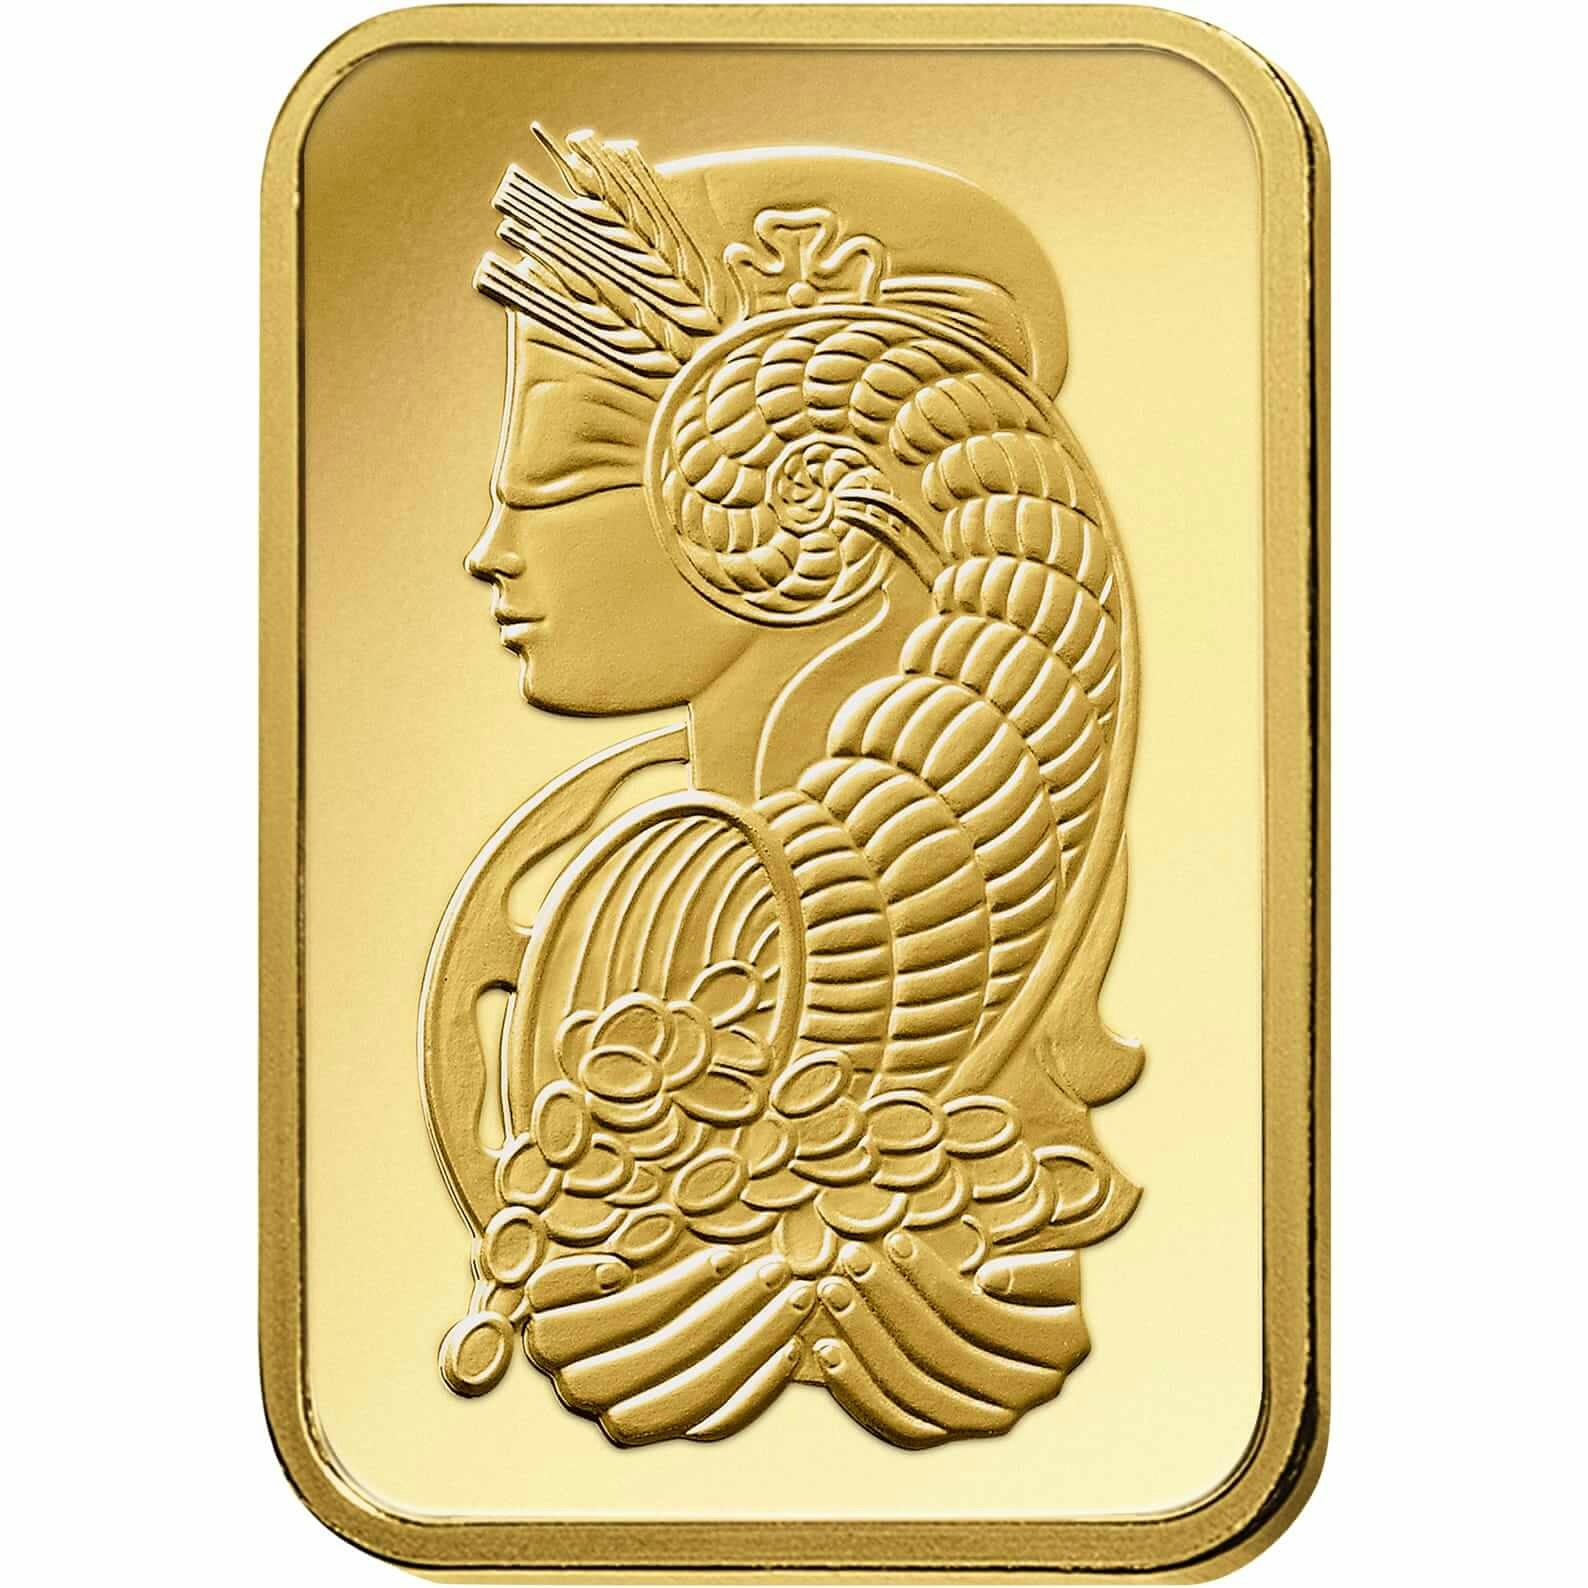 Achat d'or, 0.3 gram d'or pur Lady Fortuna - PAMP Suisse - Front 